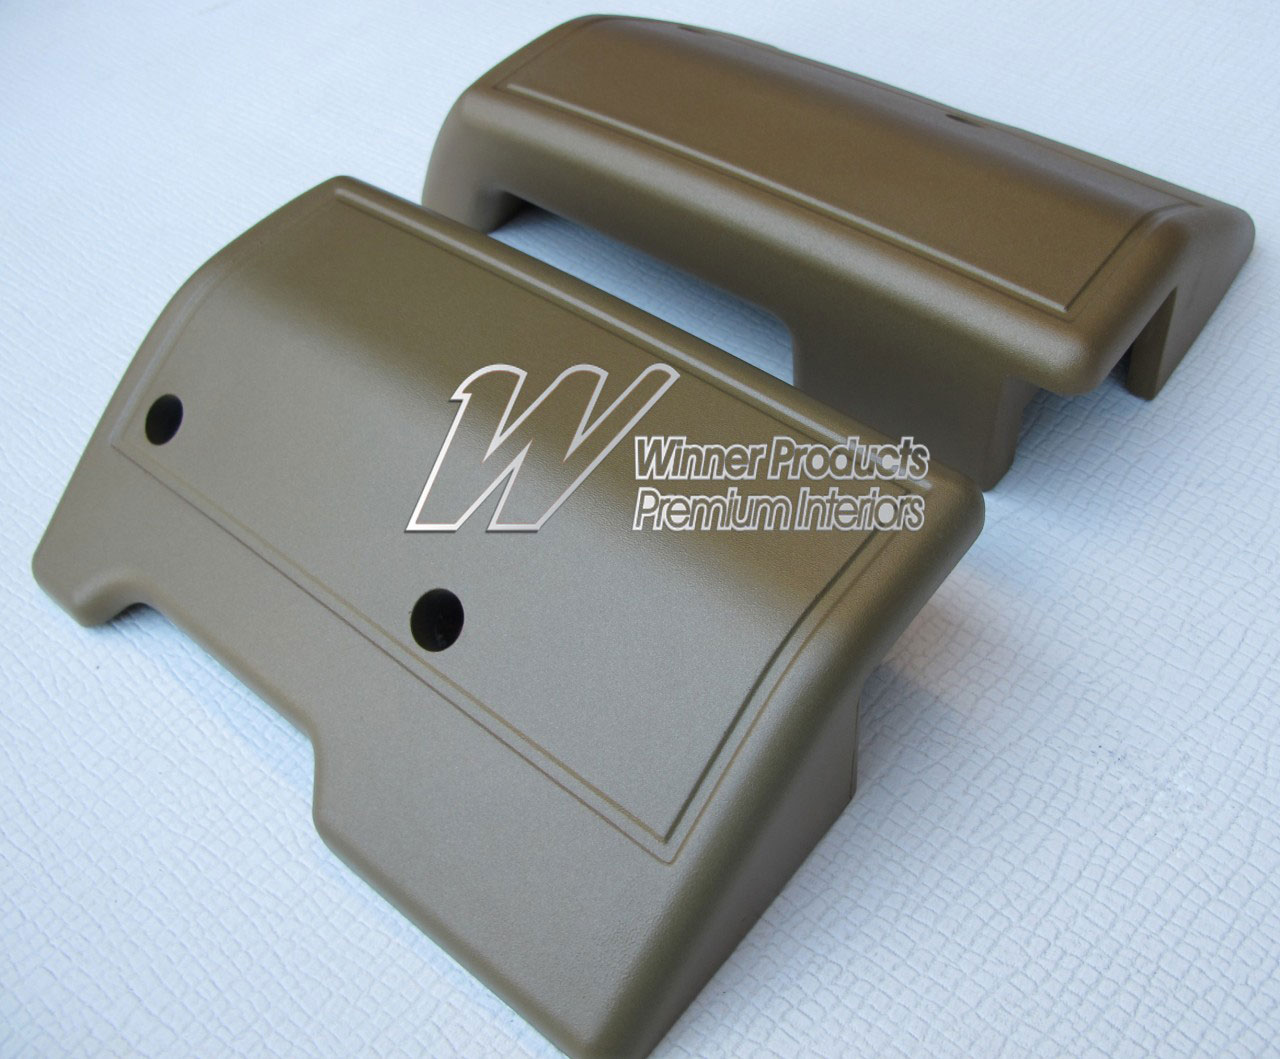 Holden Monaro HG Monaro GTS Coupe 11X Antique Gold Arm Rests (Image 1 of 1)